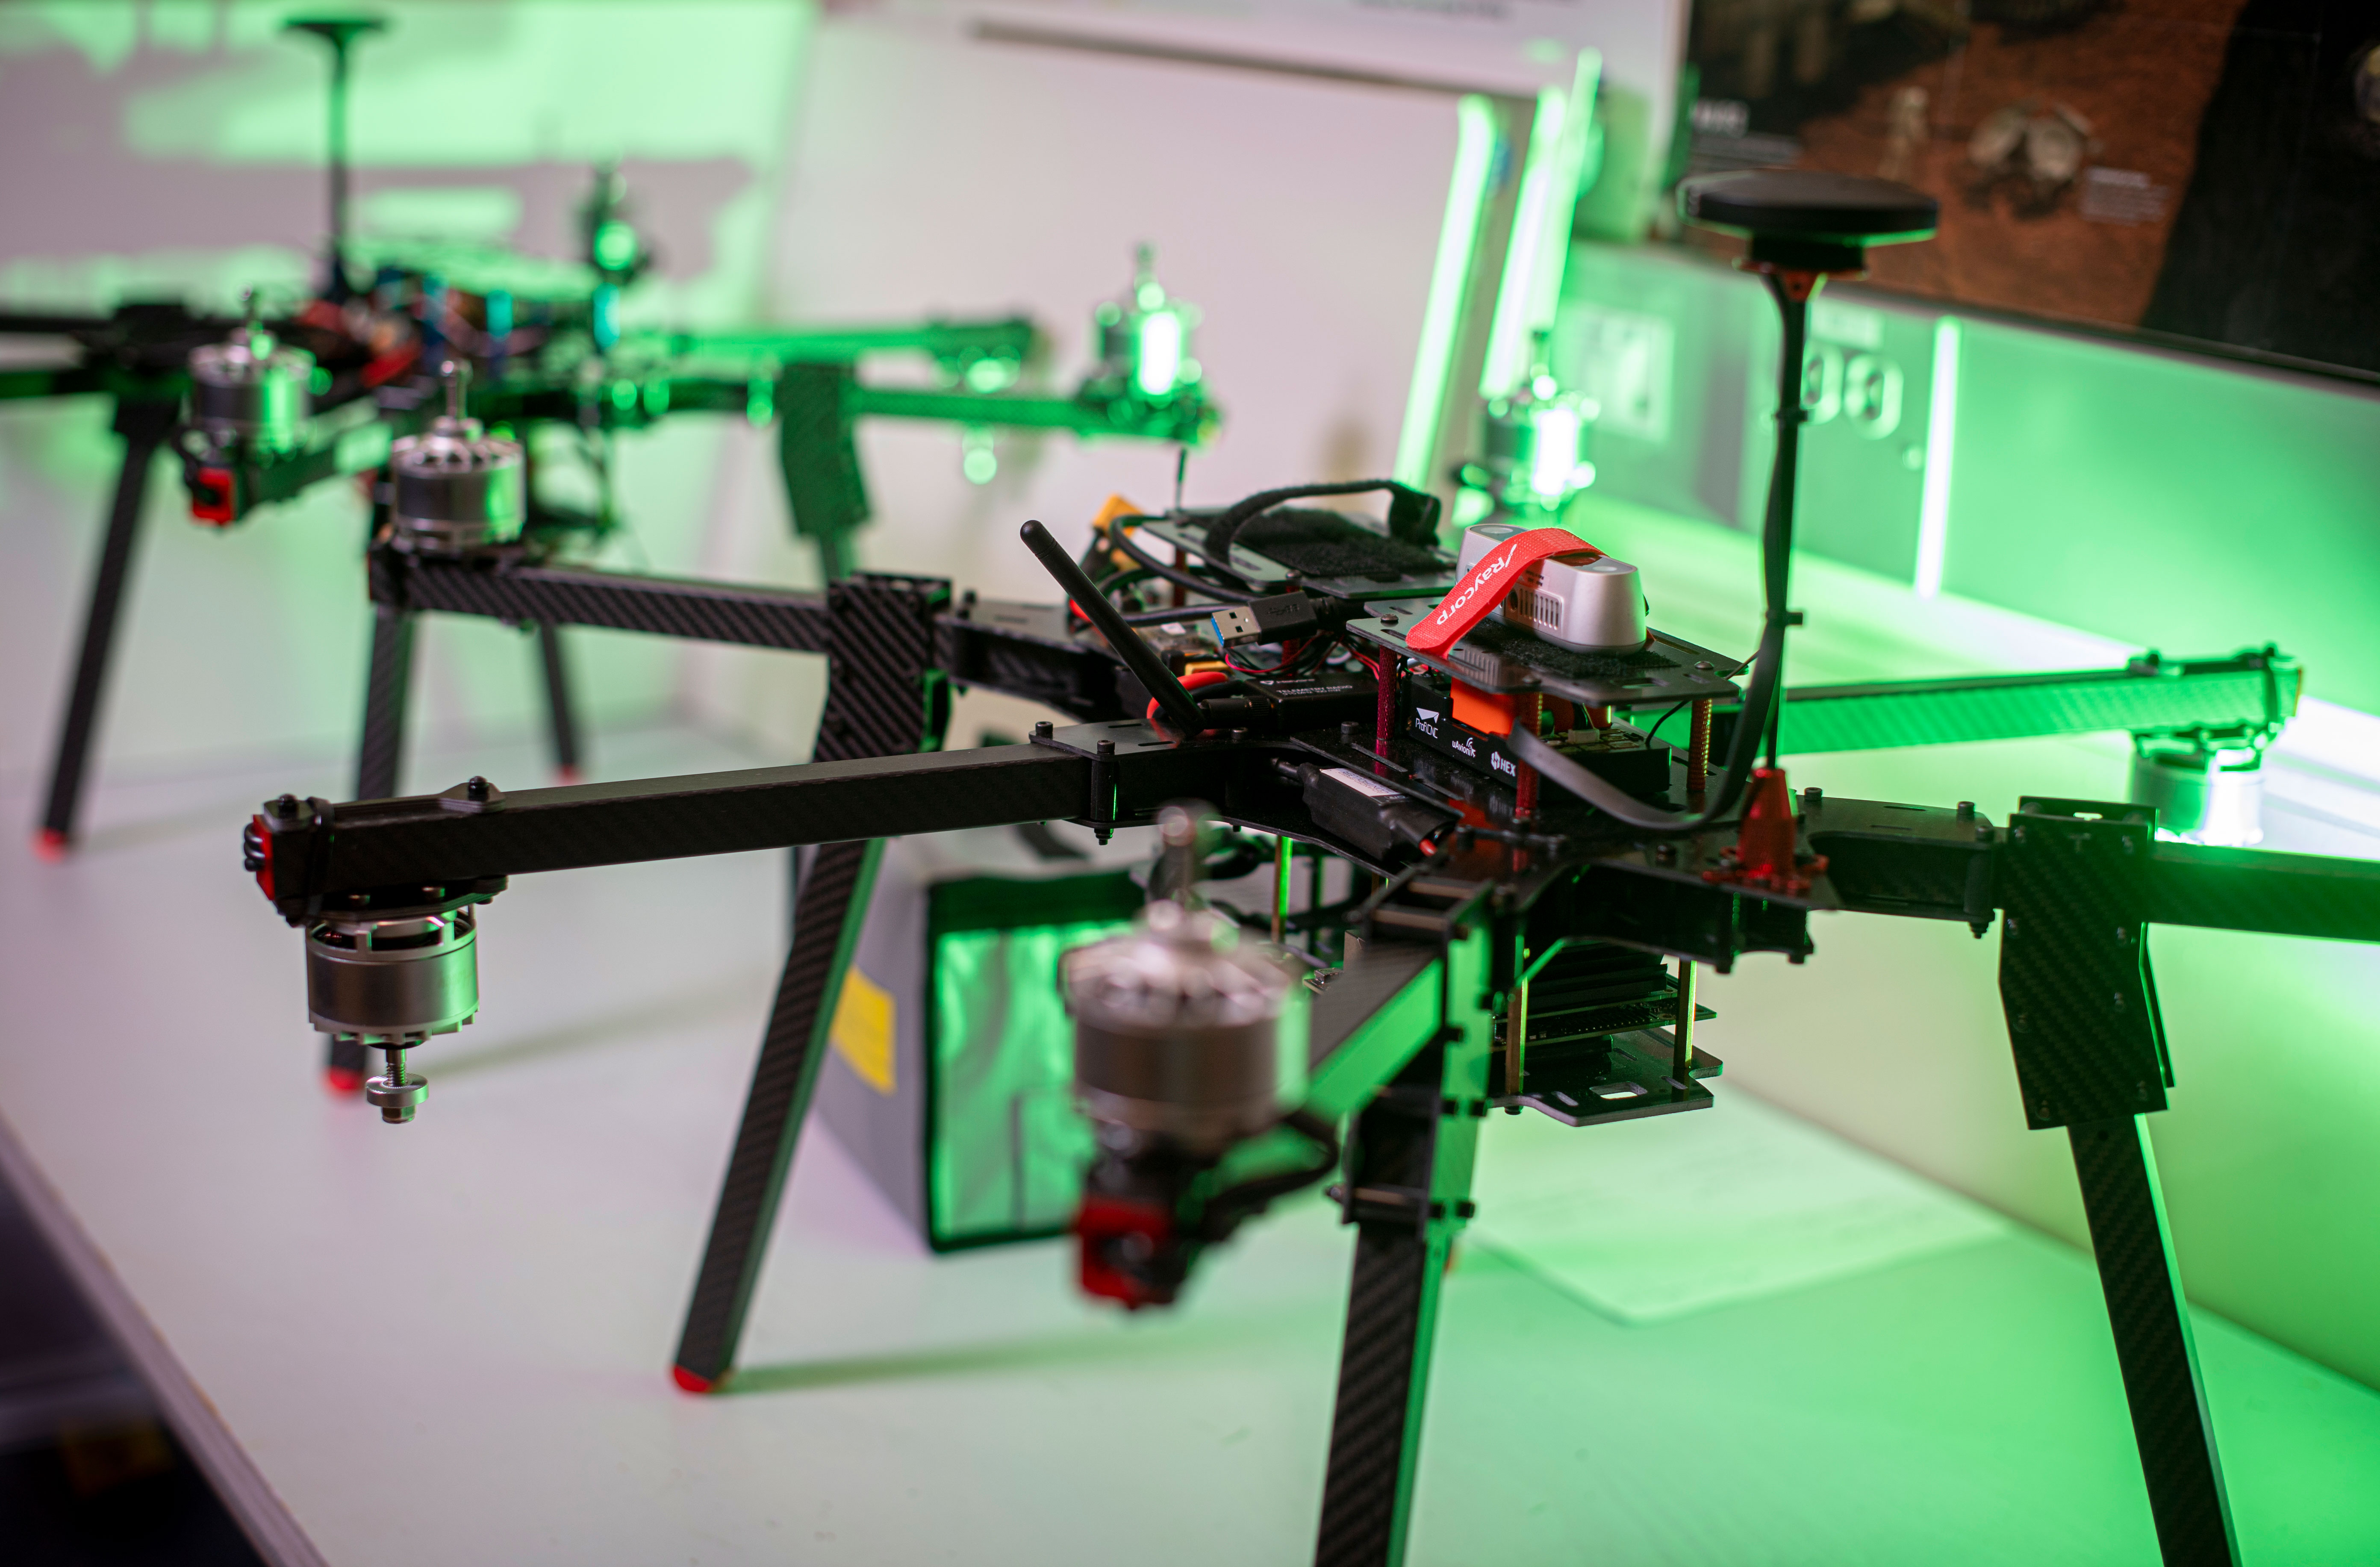 Photo of drones on a table with a green light in the background